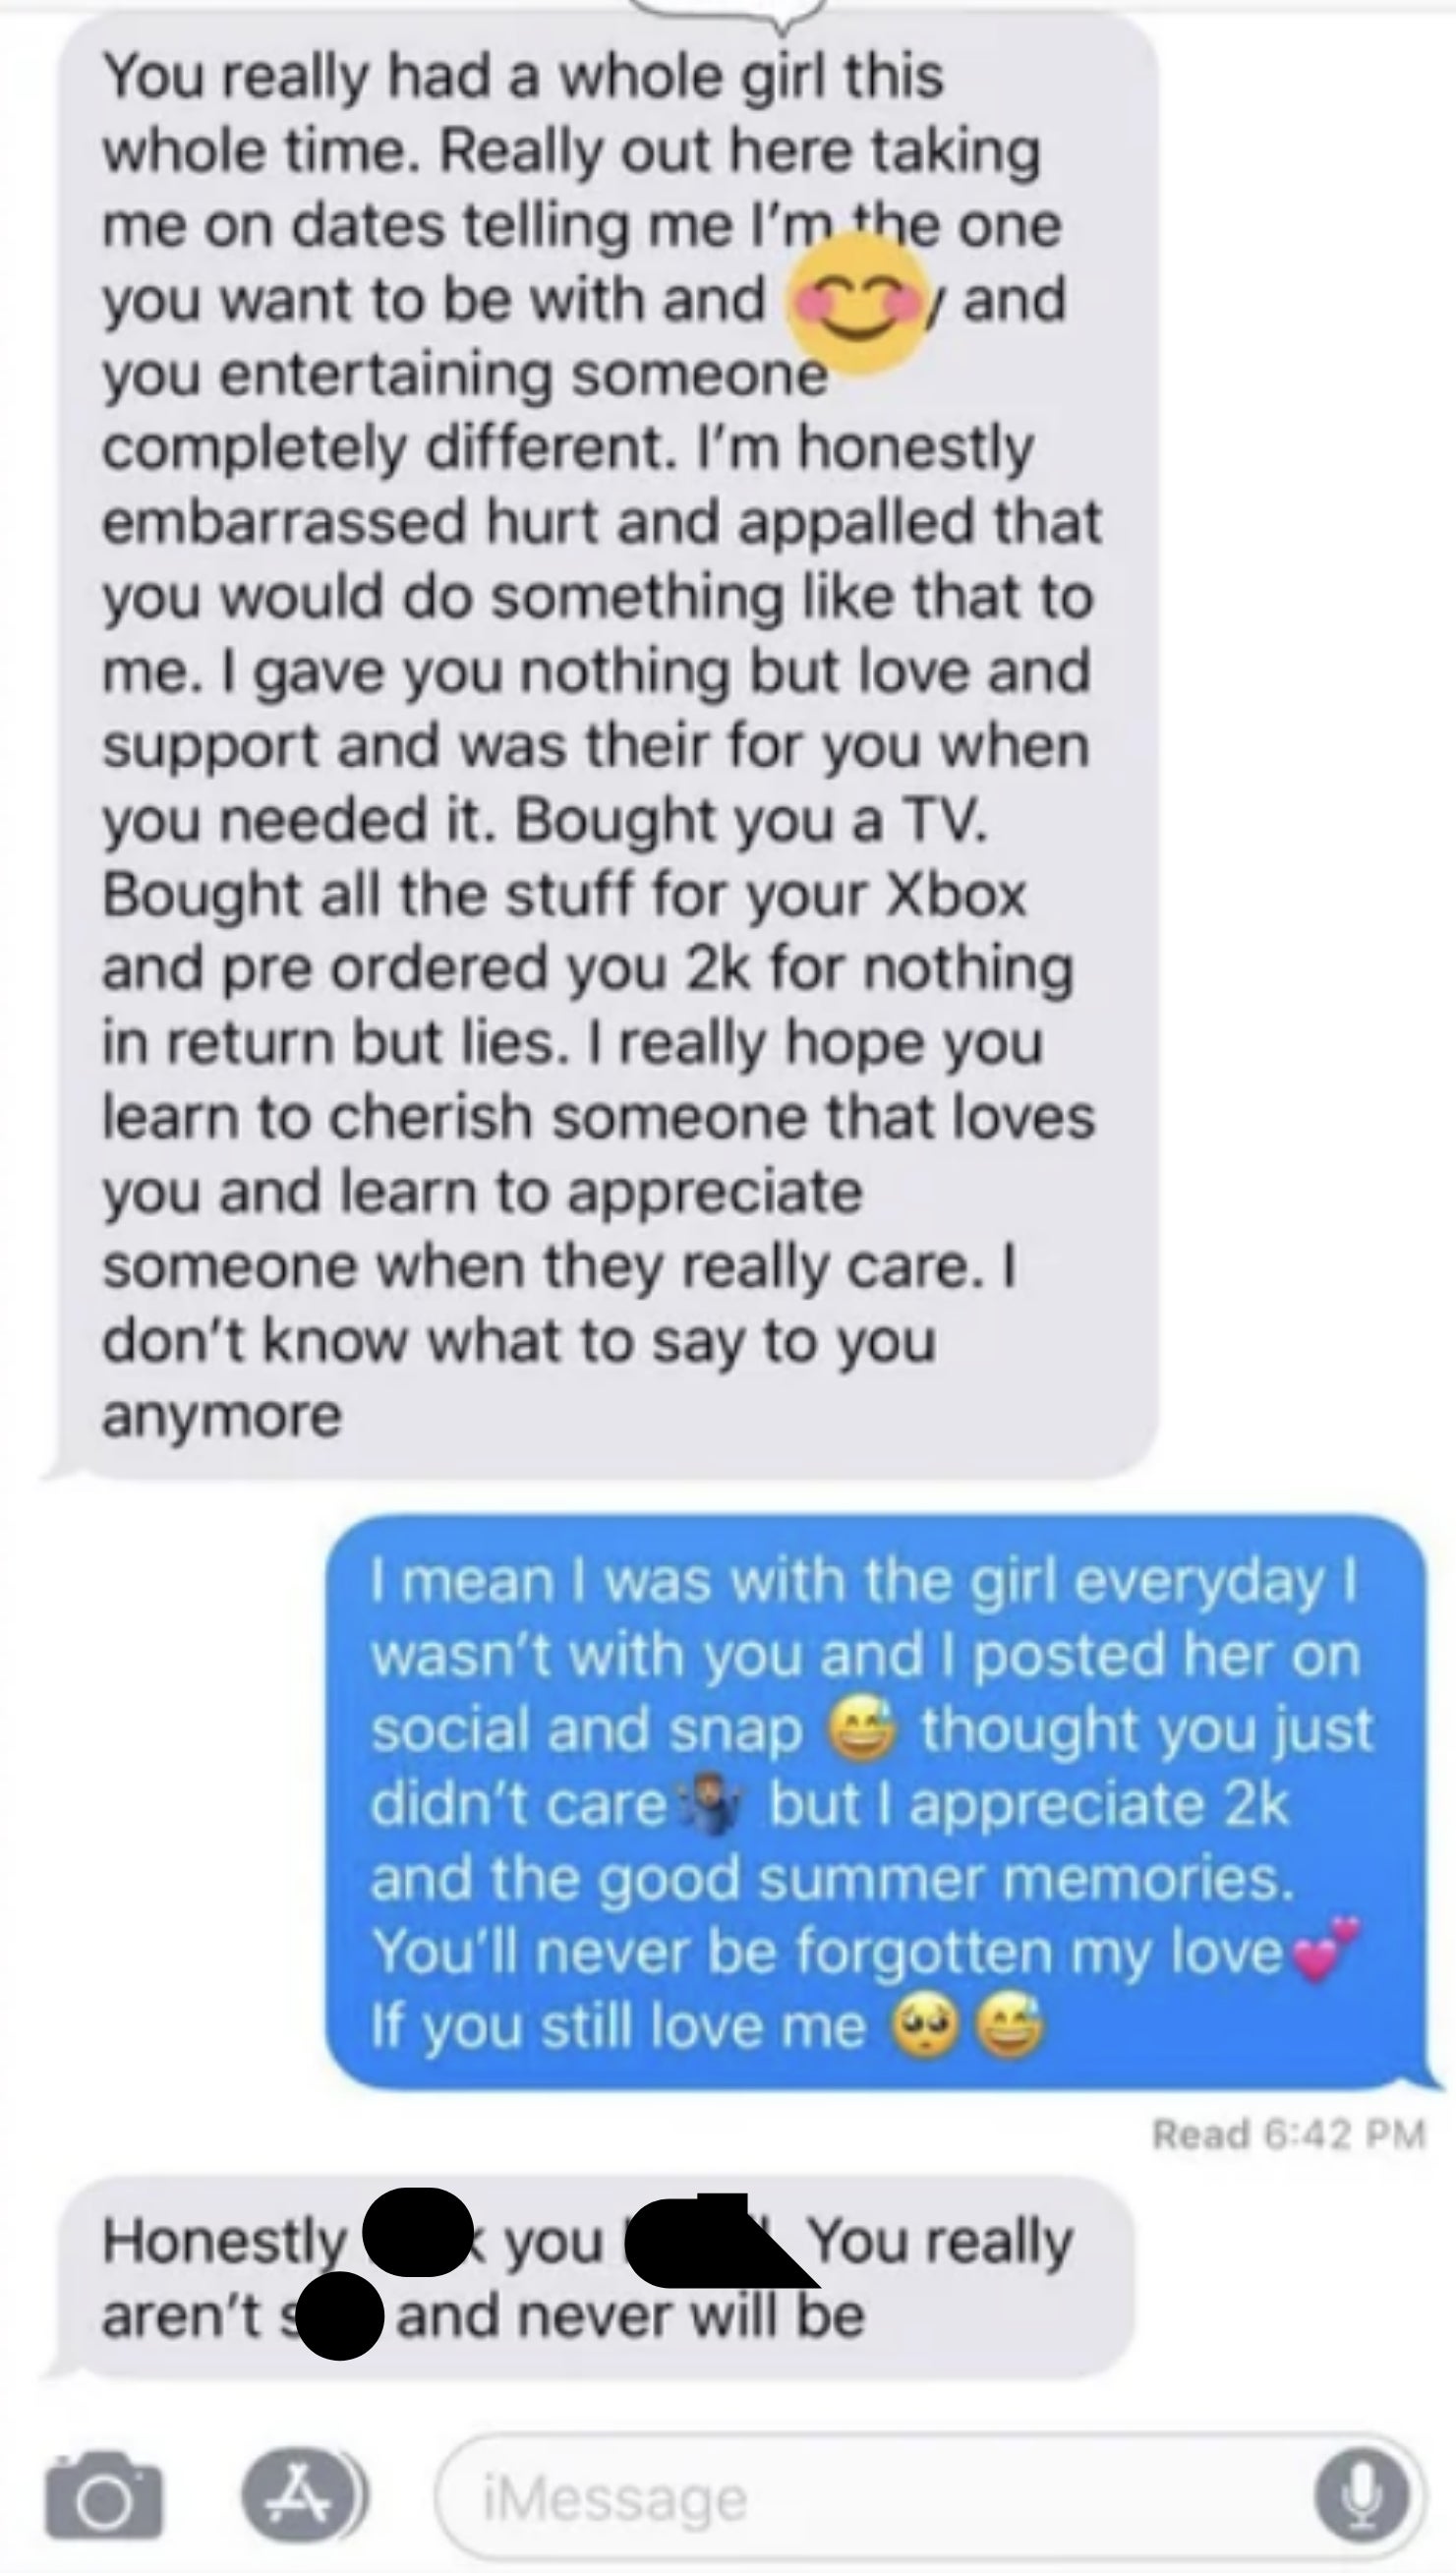 She lists all the ways she gave him love and support, bought him a TV, while he was with another girl; he says &quot;I was with the girl every day I wasn&#x27;t with you and I posted her on social; I thought you just didn&#x27;t care, but I appreciate the good memories&quot;